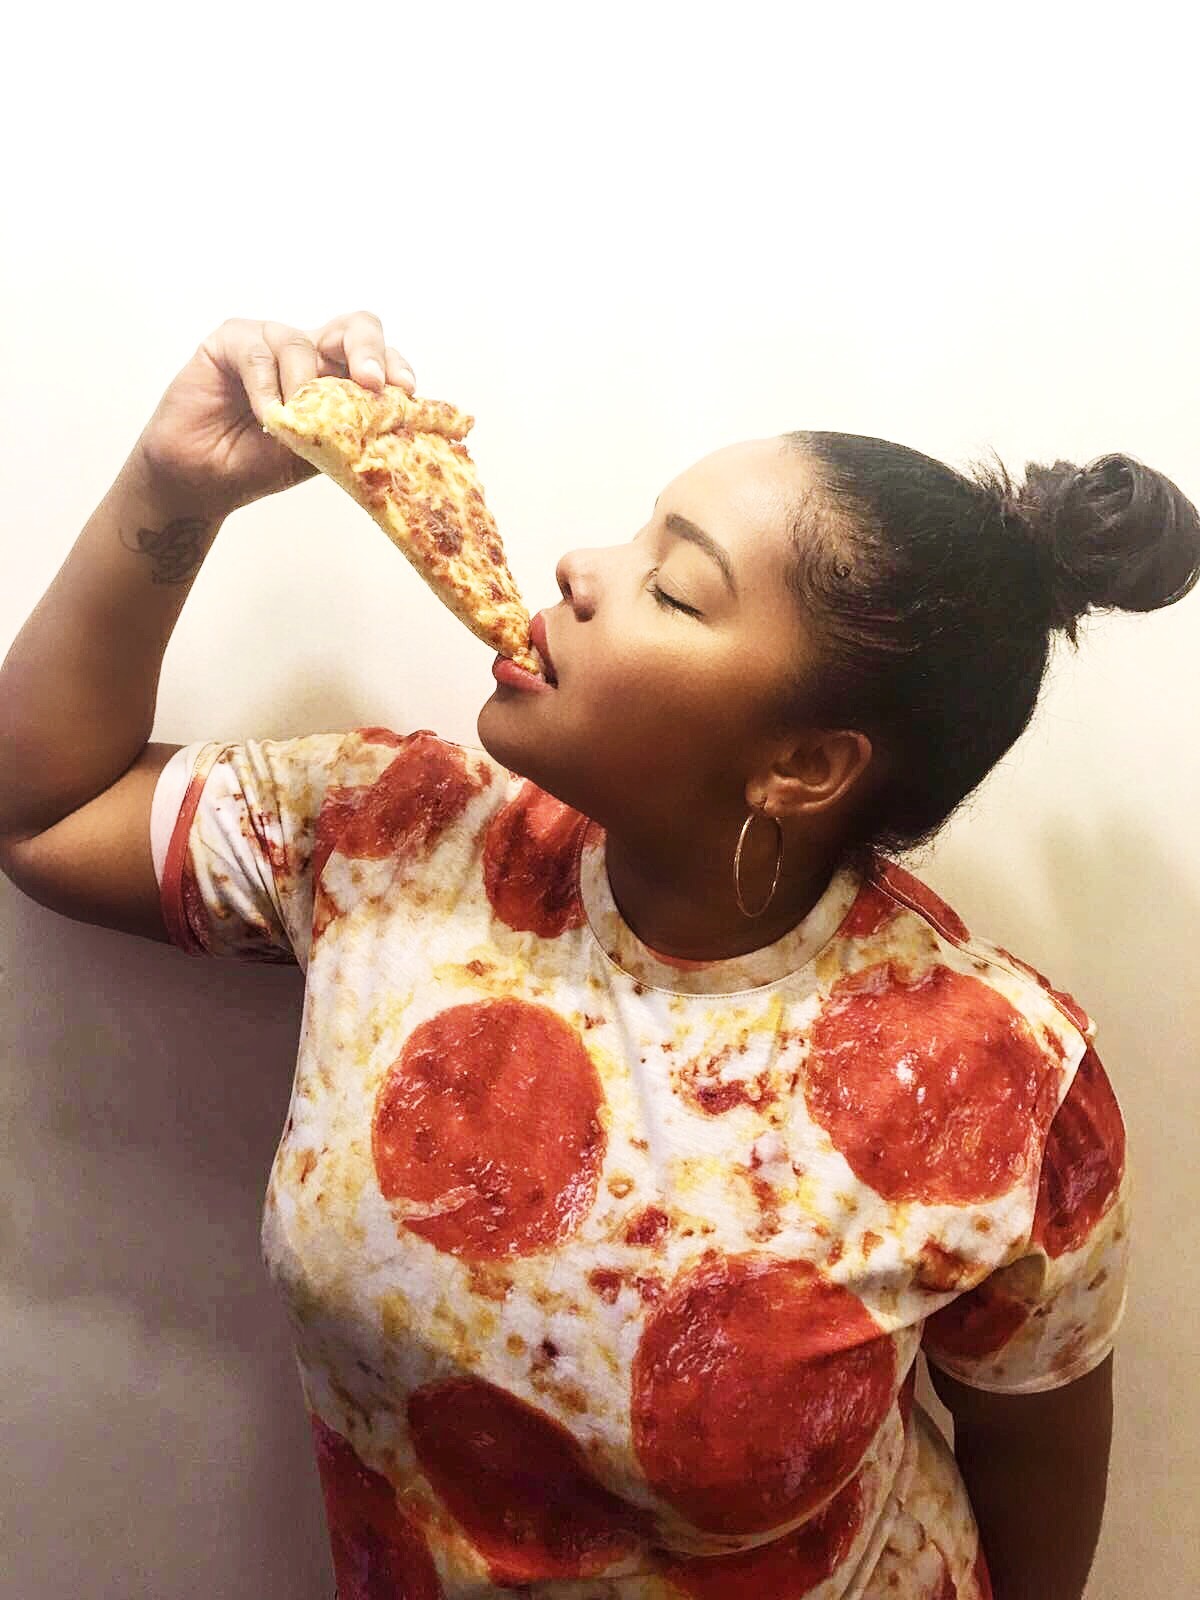 .@ChicagoTown – The Ultimate Pizza Hit For #GirlsNightIn